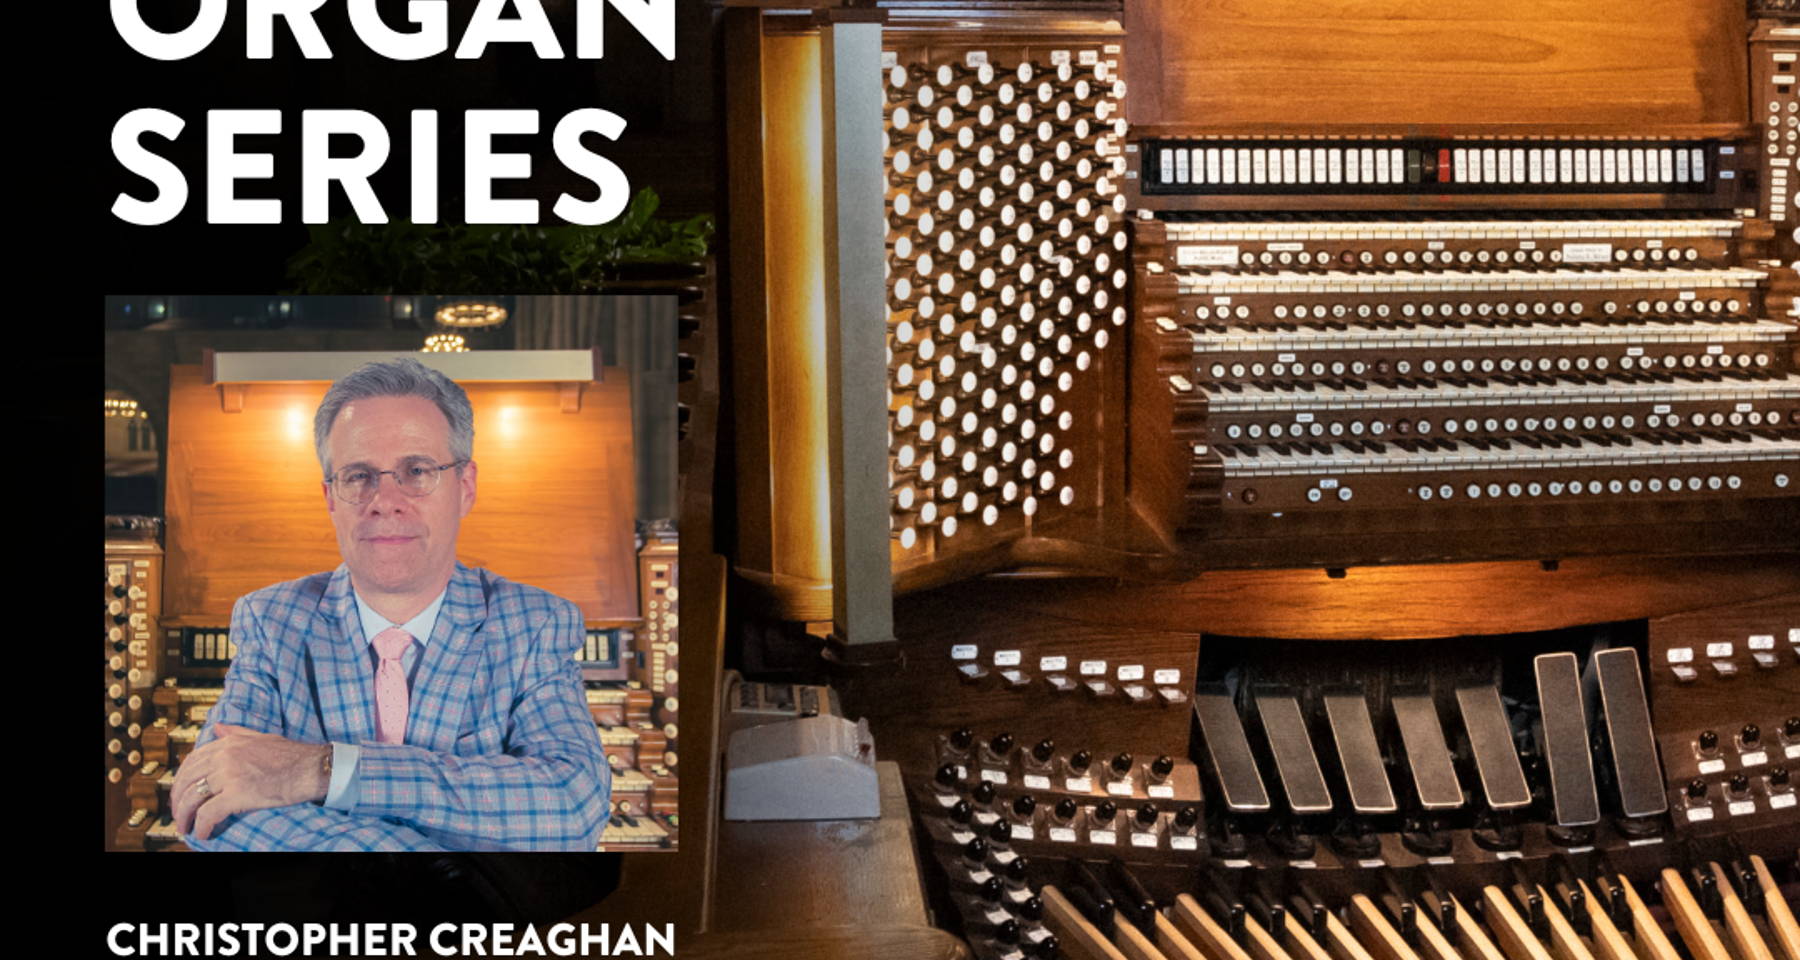 The King of Instruments Summer Organ Series: Episode 1